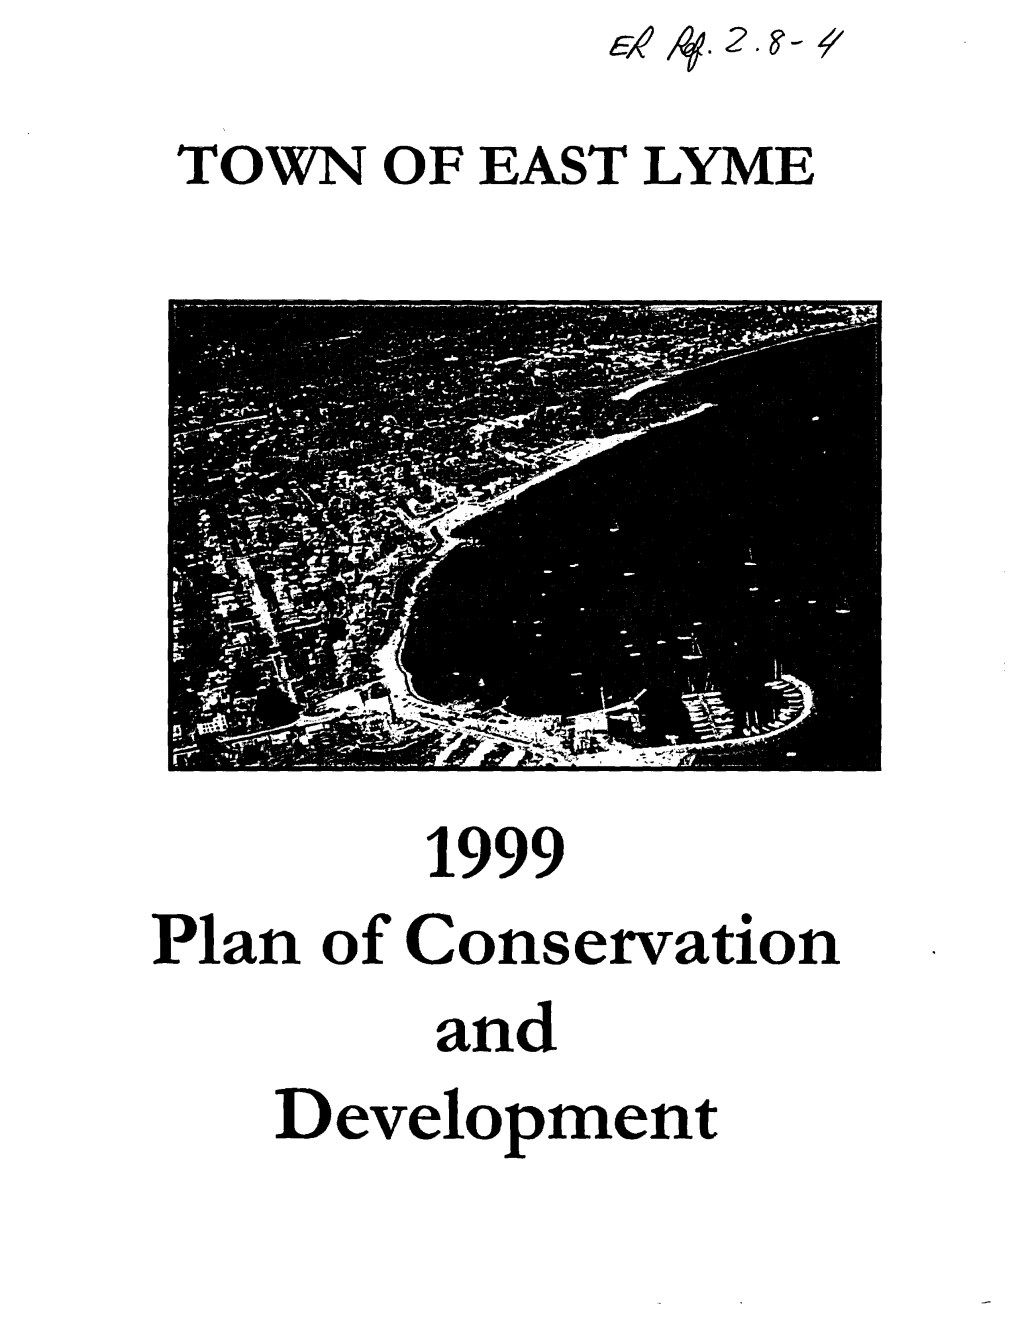 Town of East Lyme 1999 Plan of Conservation and Development